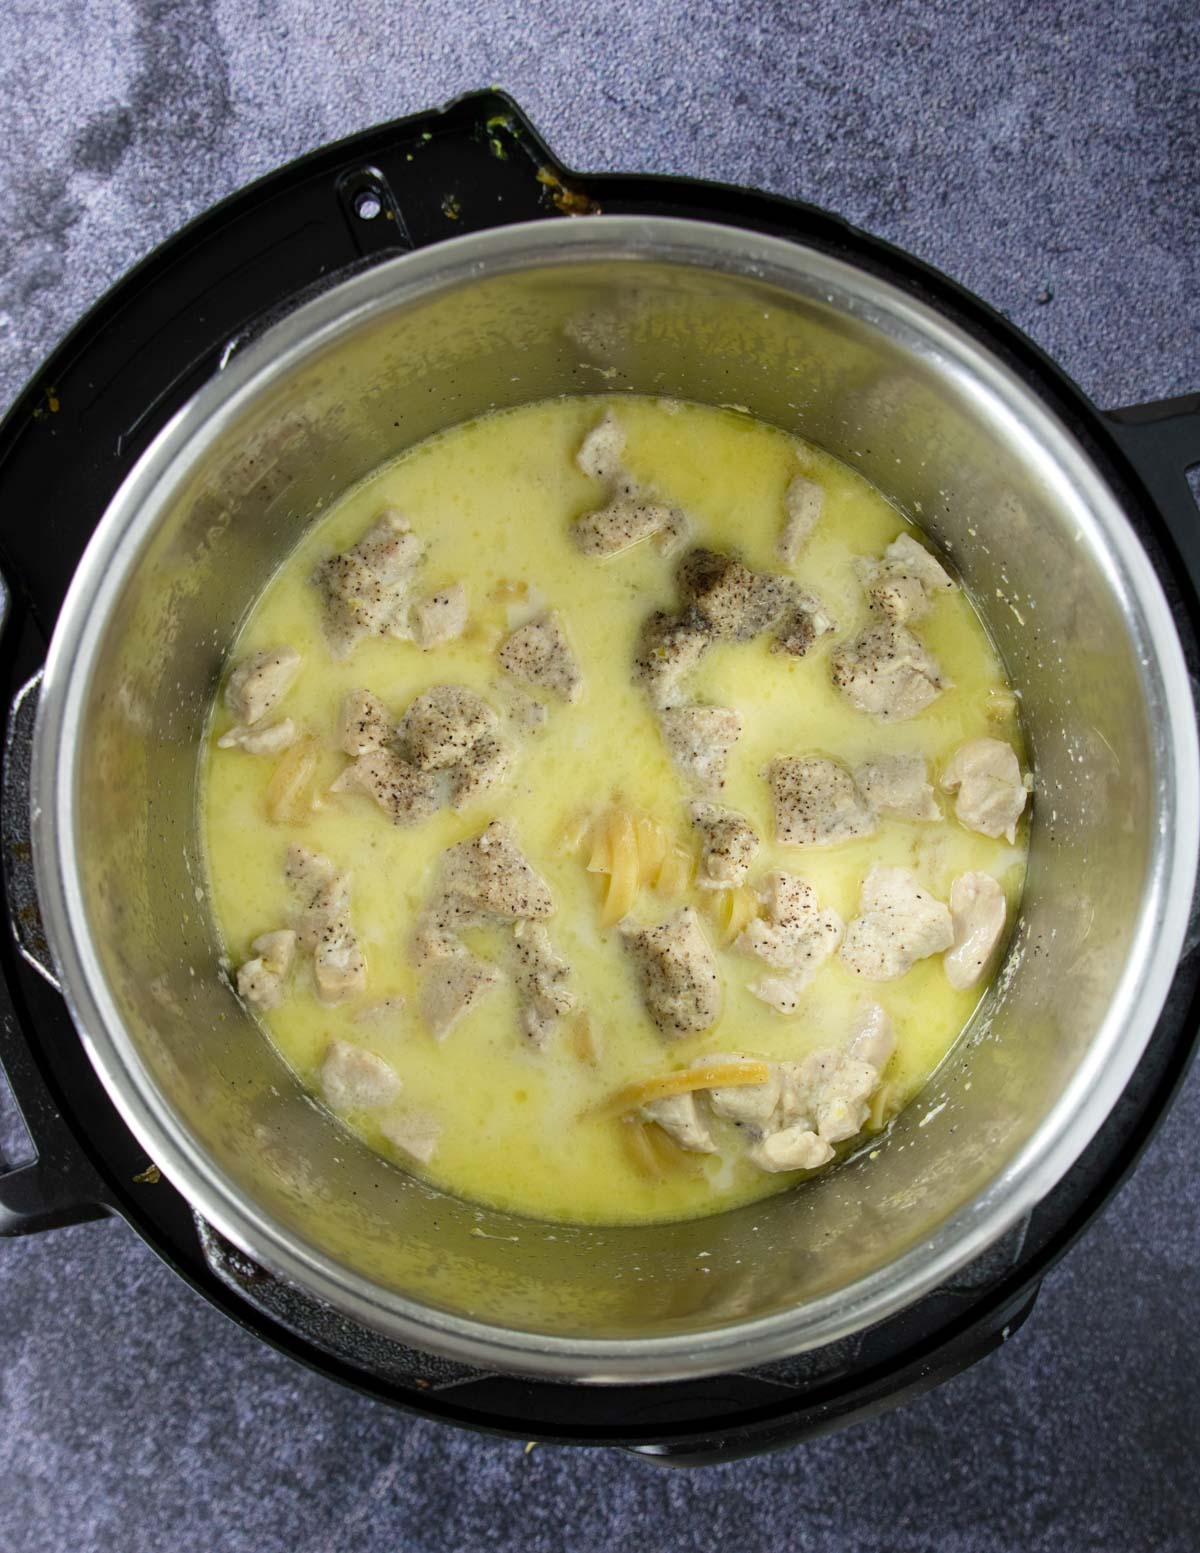 Instant Pot chicken alfredo that is cooked but not finished